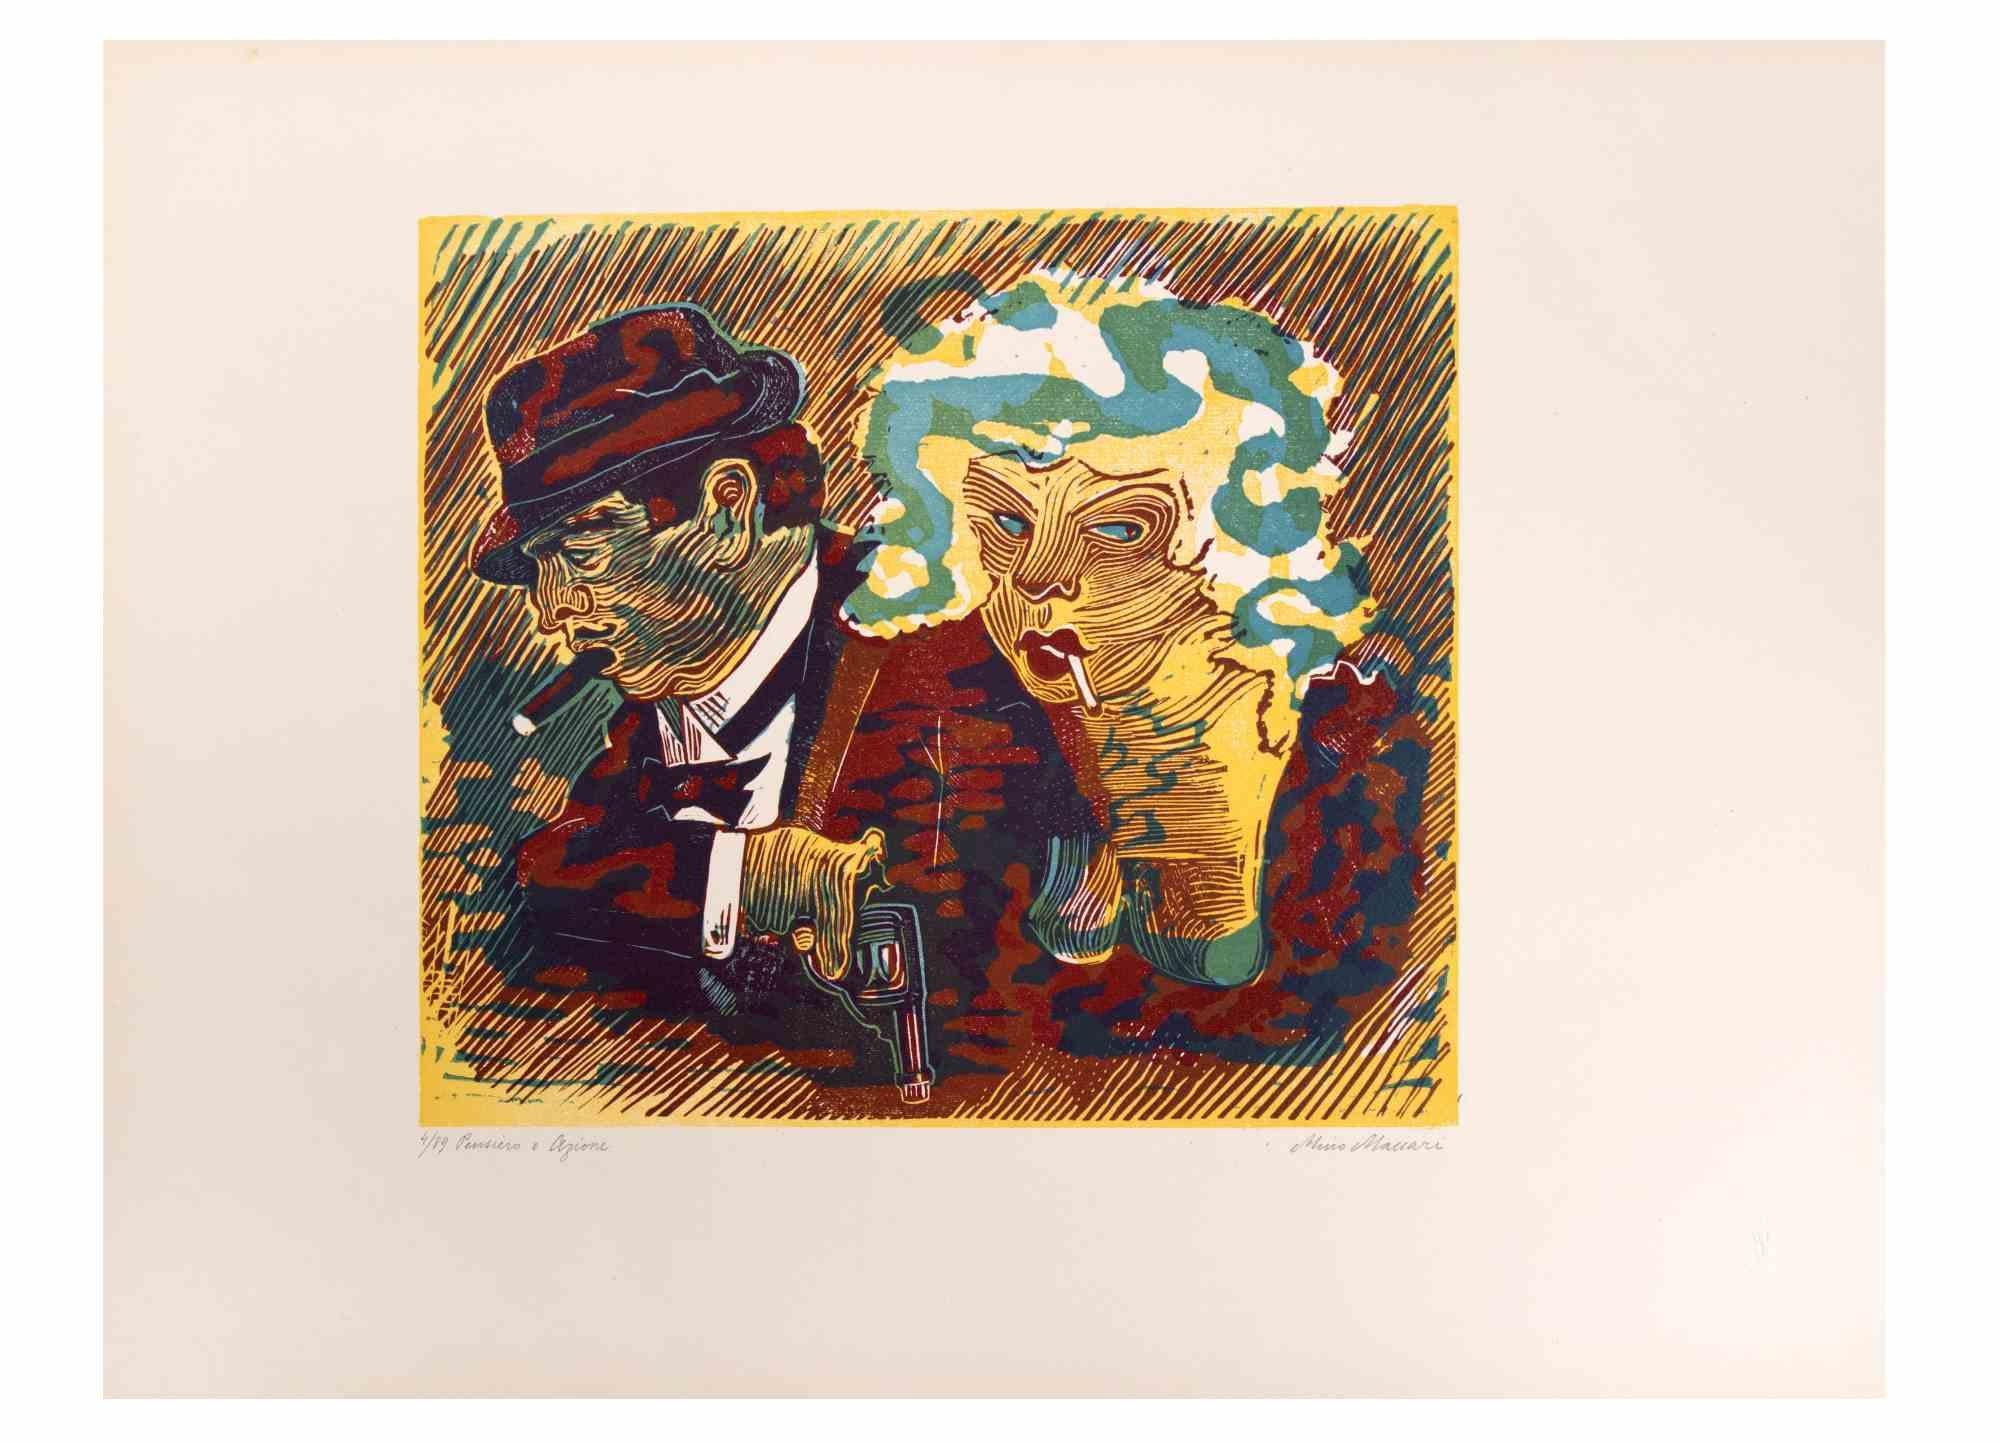 Imagination and Action is an Artwork realized by Mino Maccari  (1924-1989) in the Mid-20th Century.

Colored woodcut on paper. Hand-signed on the lower, numbered 4/89 specimens and titled on the left margin.

Good conditions.

Mino Maccari (Siena,